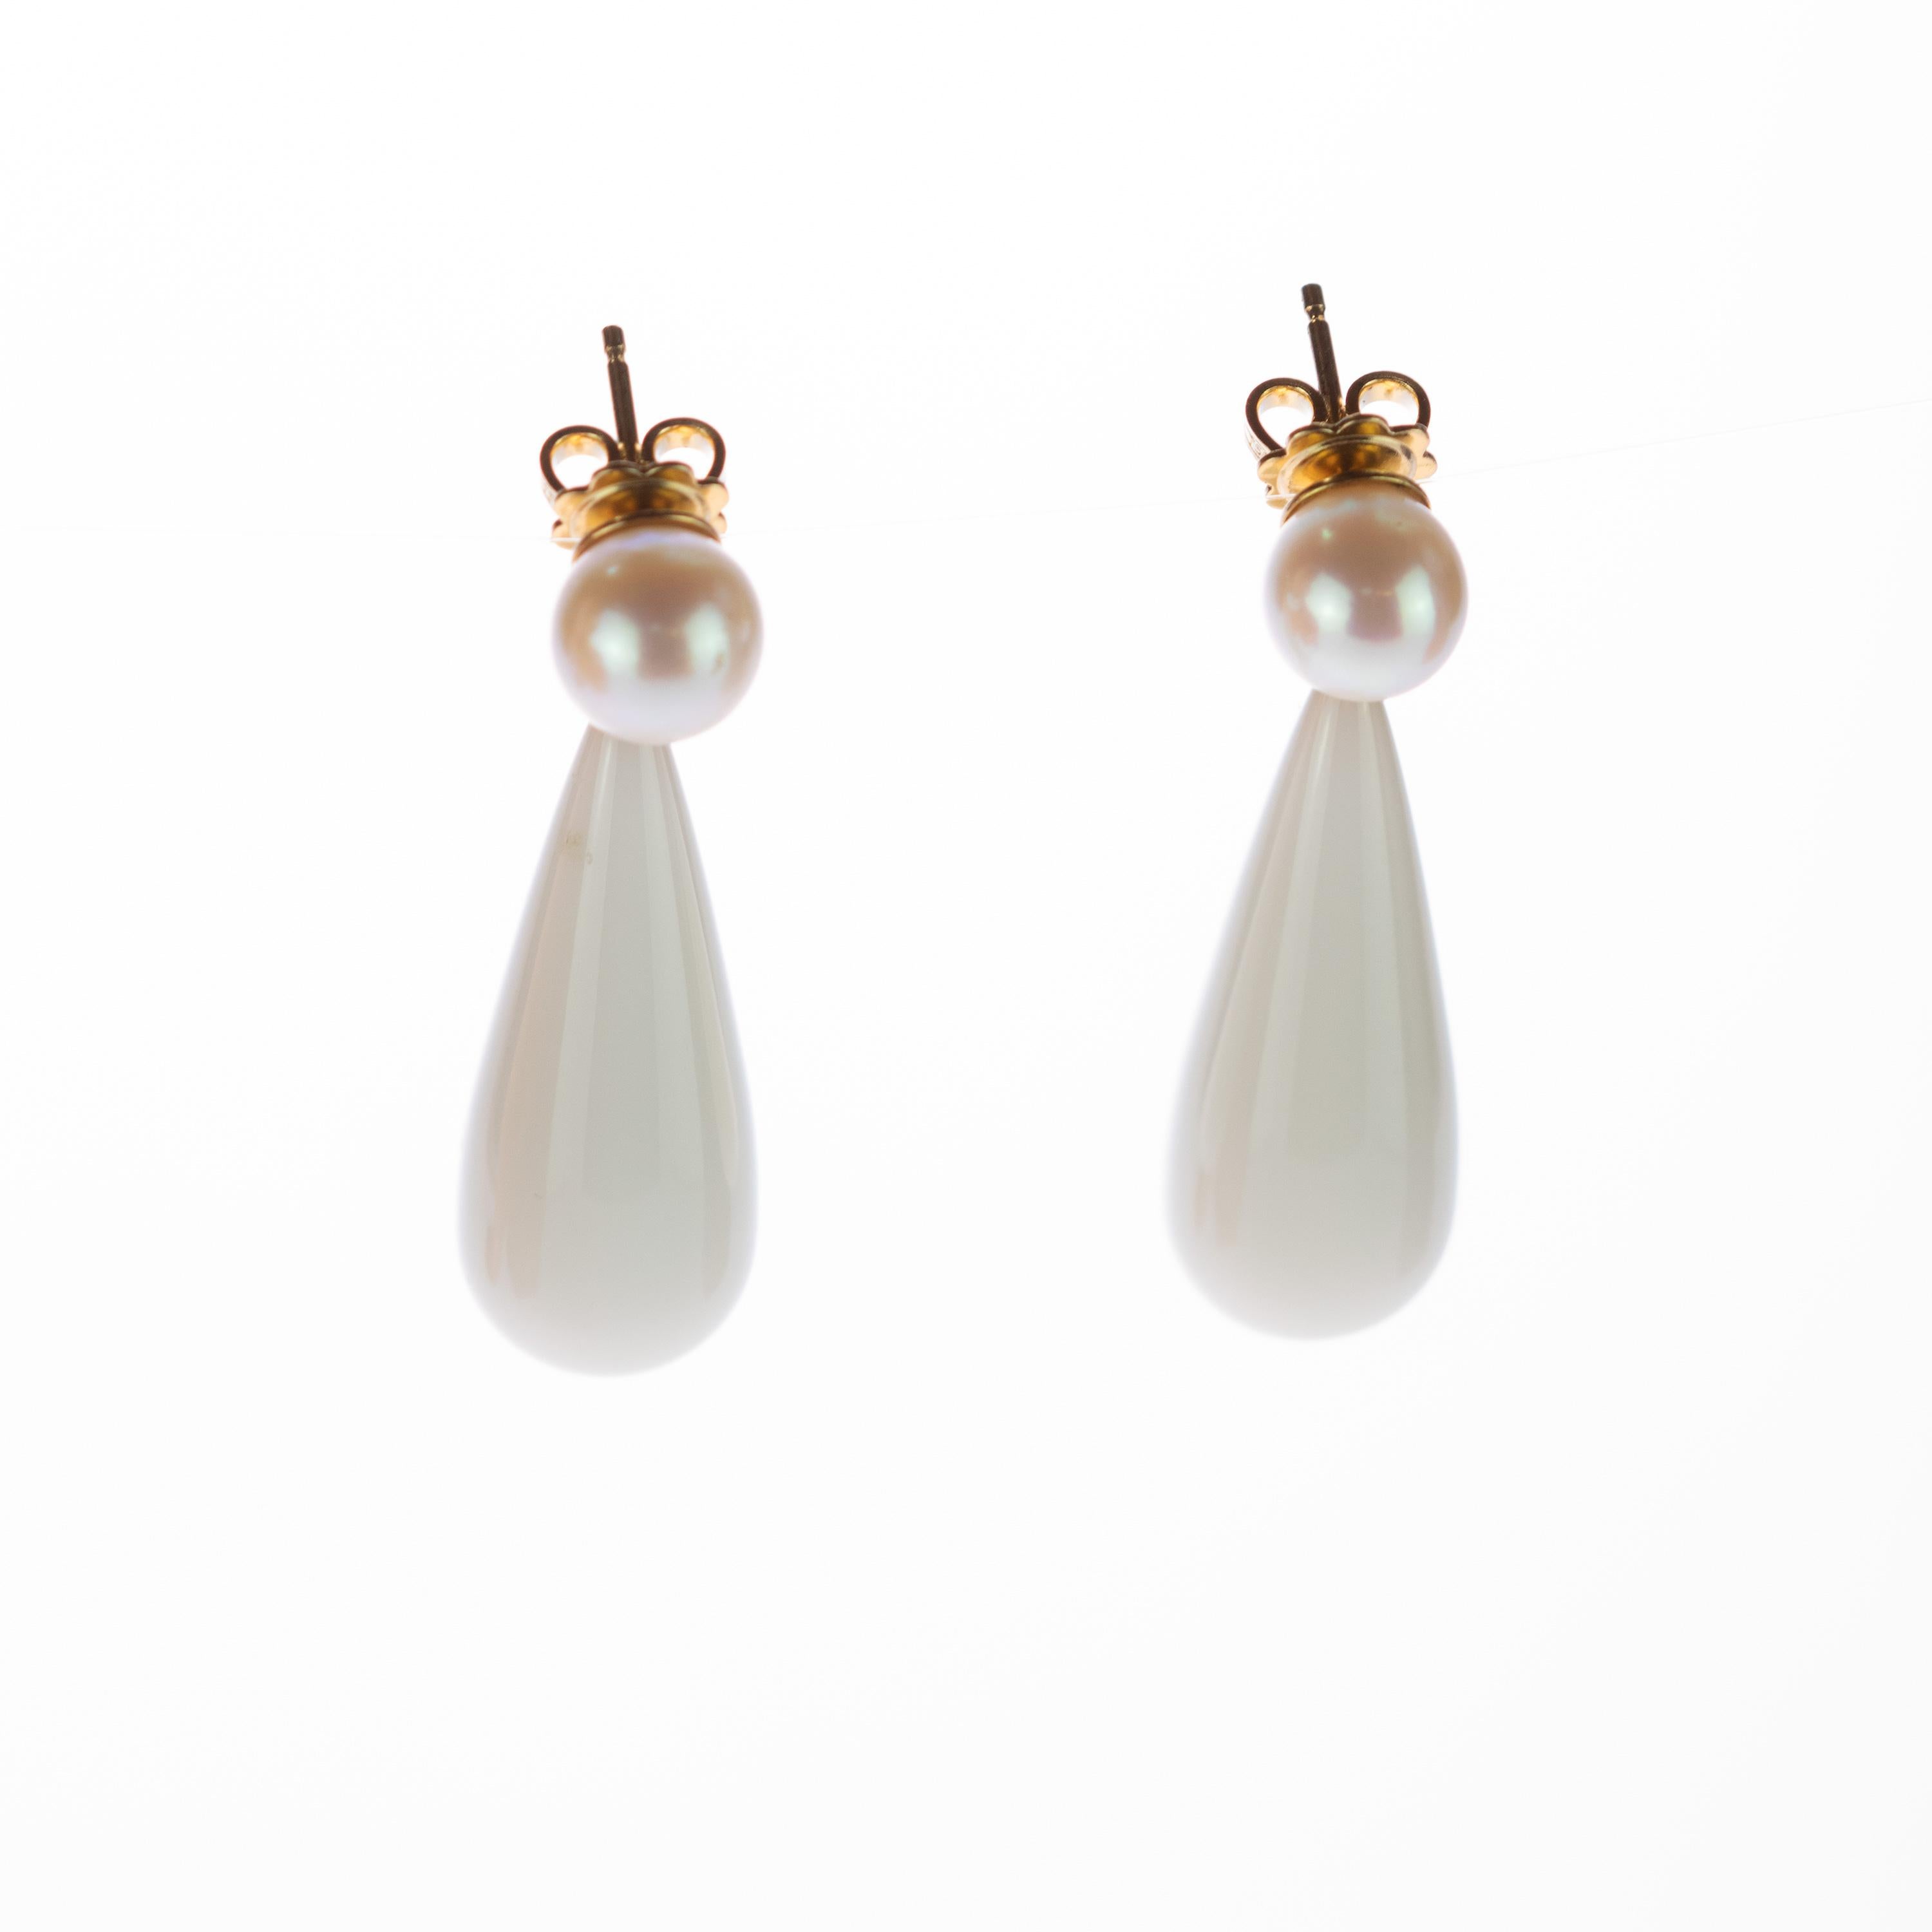 Get involved in the design and purity of these white agate and freshwater pearl earrings. Our experienced Italian jewellery designers succeed in creating quality and uniqueness in one pear-shaped and bold peace with 18 karat yellow gold earrings.
